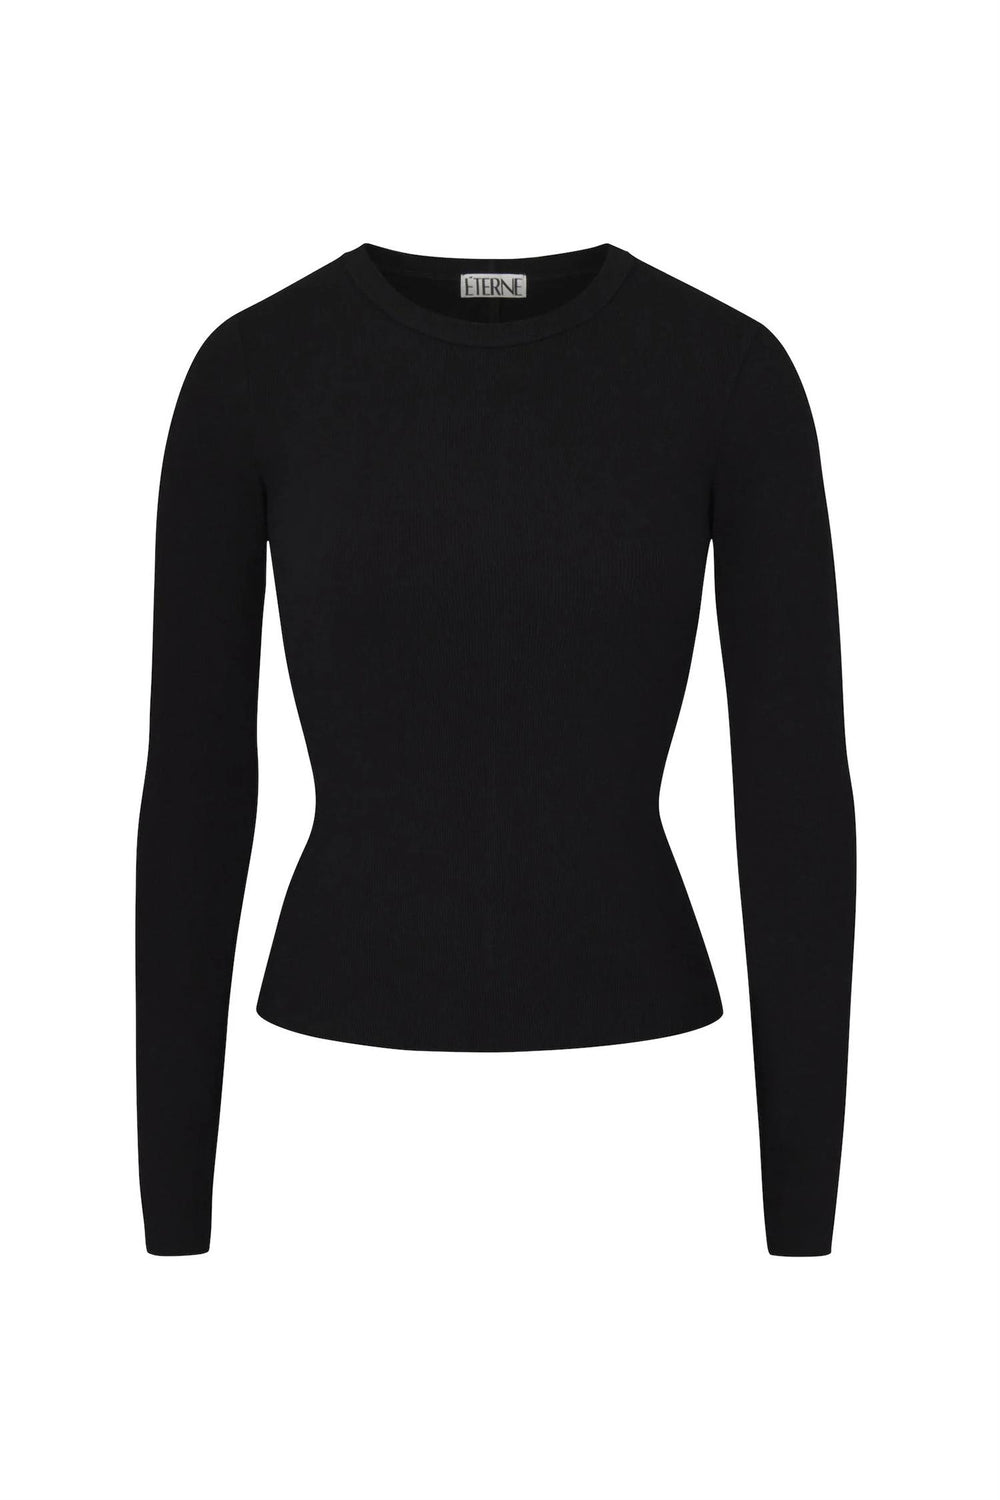 ETERNE - Long Sleeve Fitted Top Black - Dale